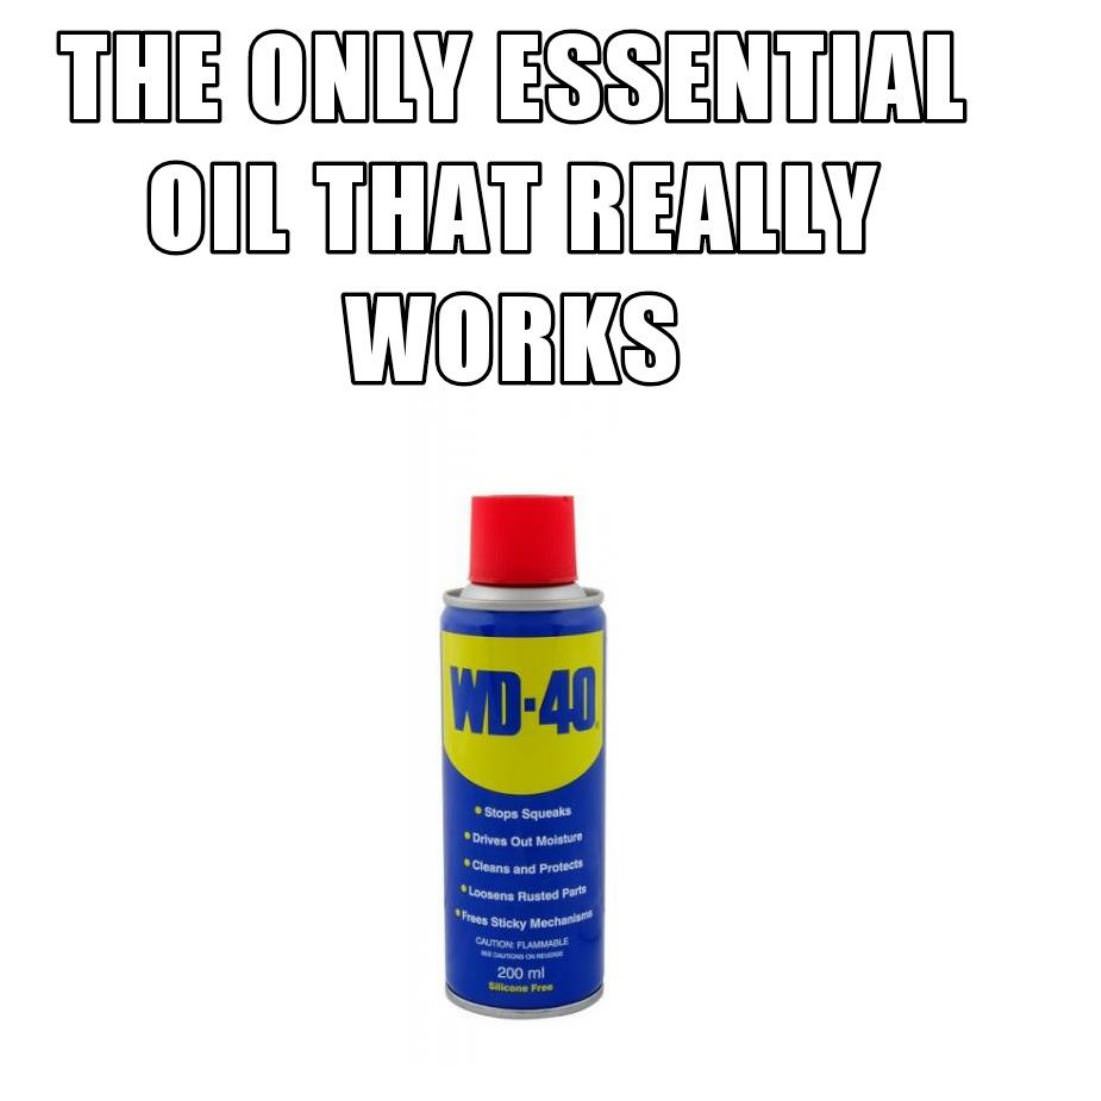 The Only Essential Oil